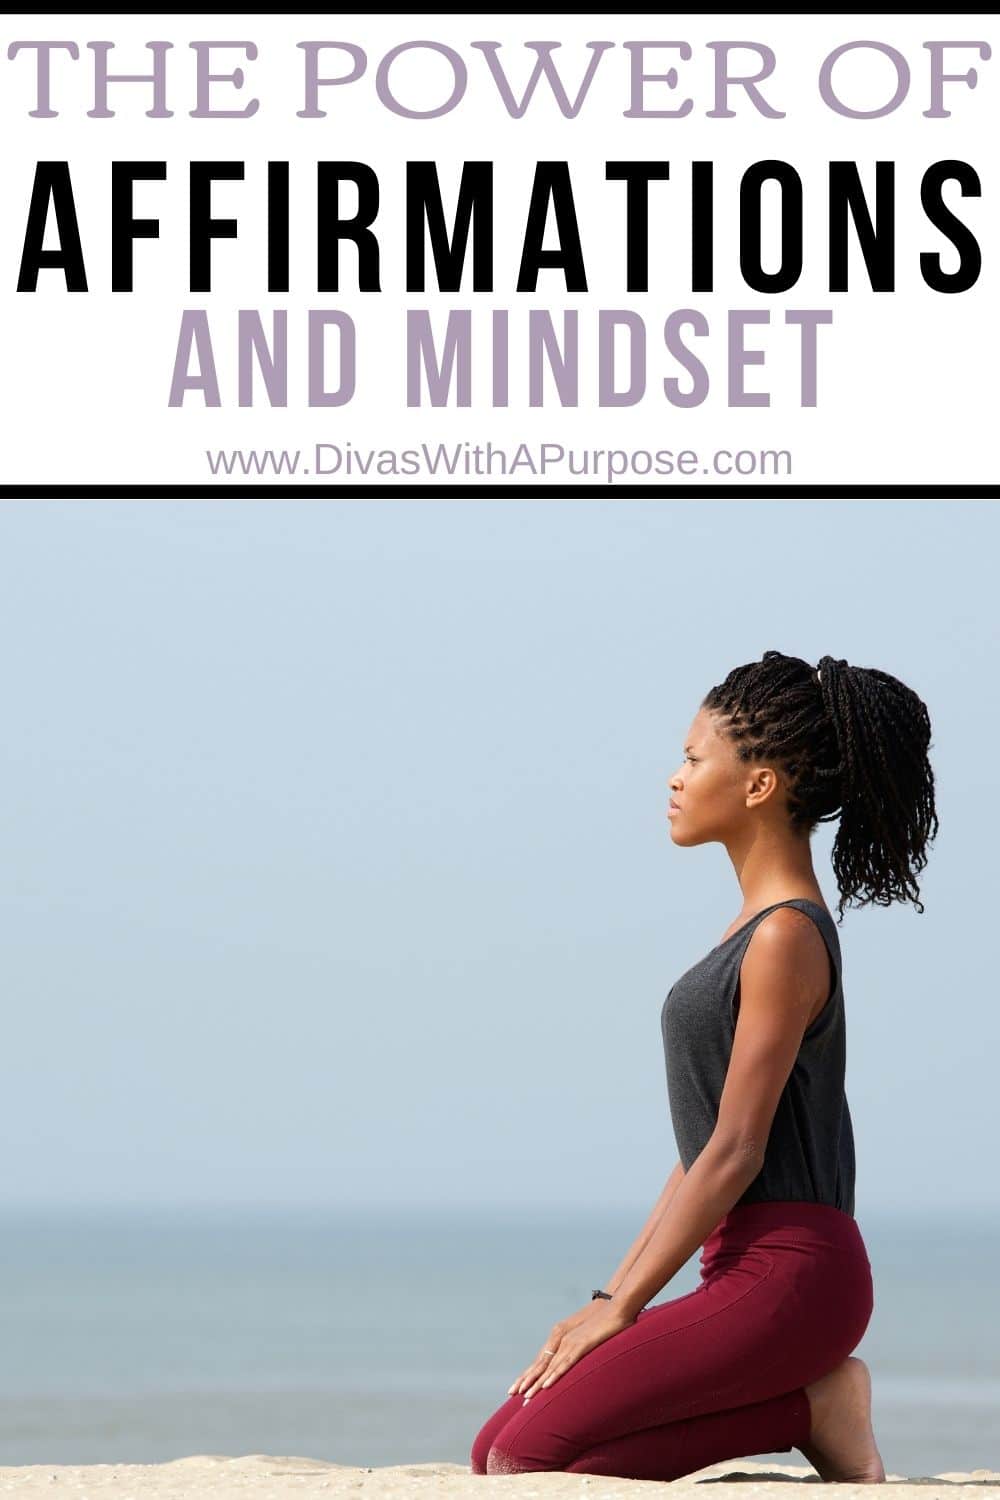 What is the power of affirmations? So many things but for starters we can transform our mindset by simply implenting them in our routines. #dailyaffirmations #positiveaffirmations #powerofaffirmations